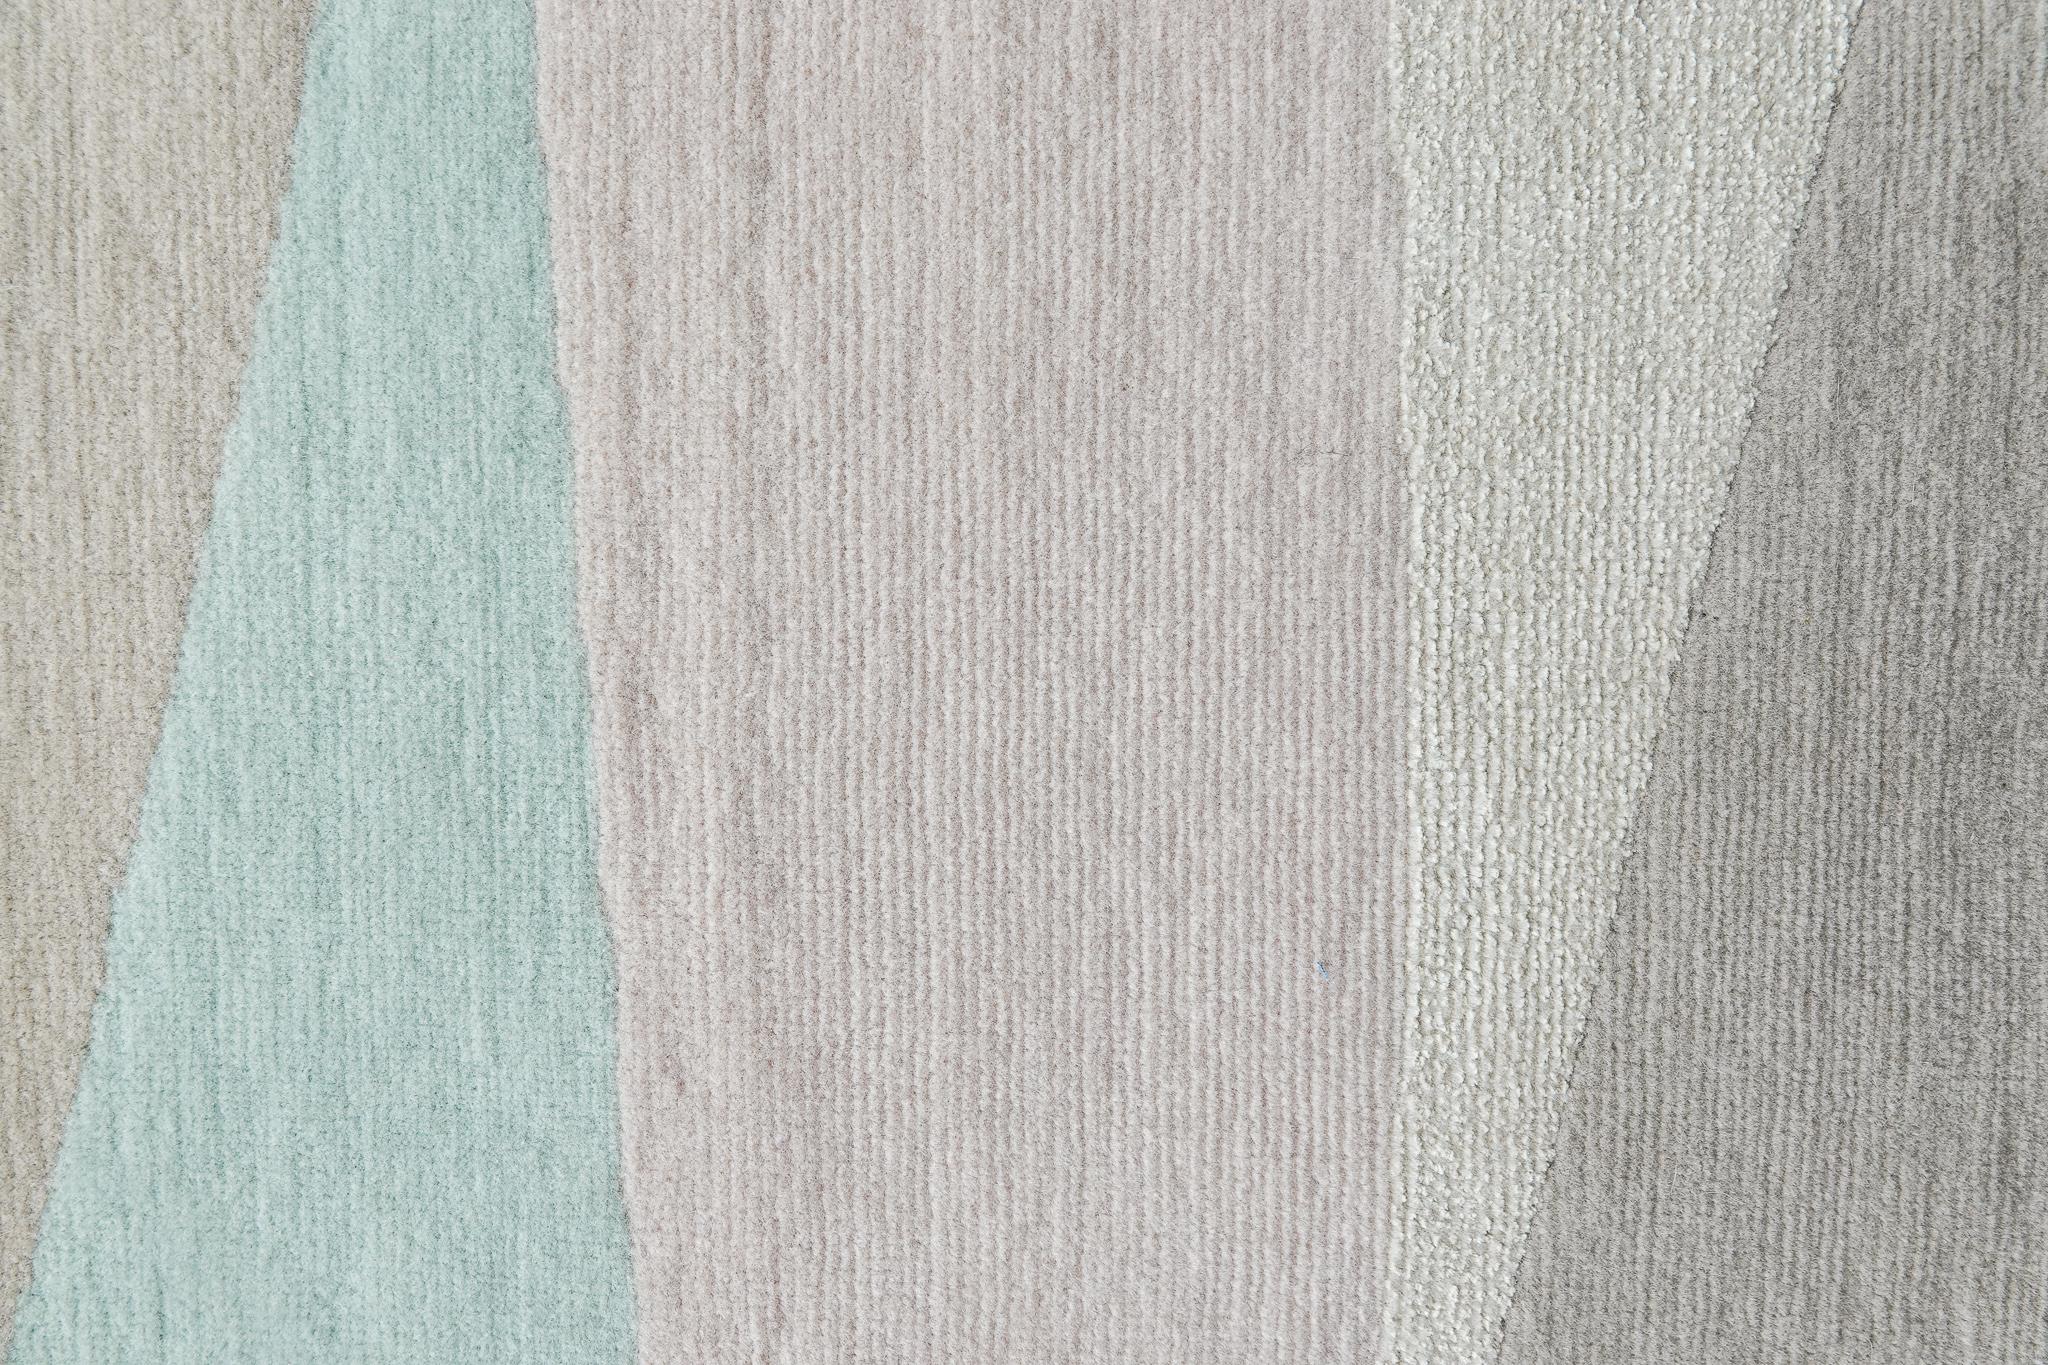 Rug design as a symphony of color

Democratic rug for spaces with elements of light, warm woods and natural light. The rug is composed of free-form and free-sized figures, which complement each other. Delicate pastel colors are combined with dusty